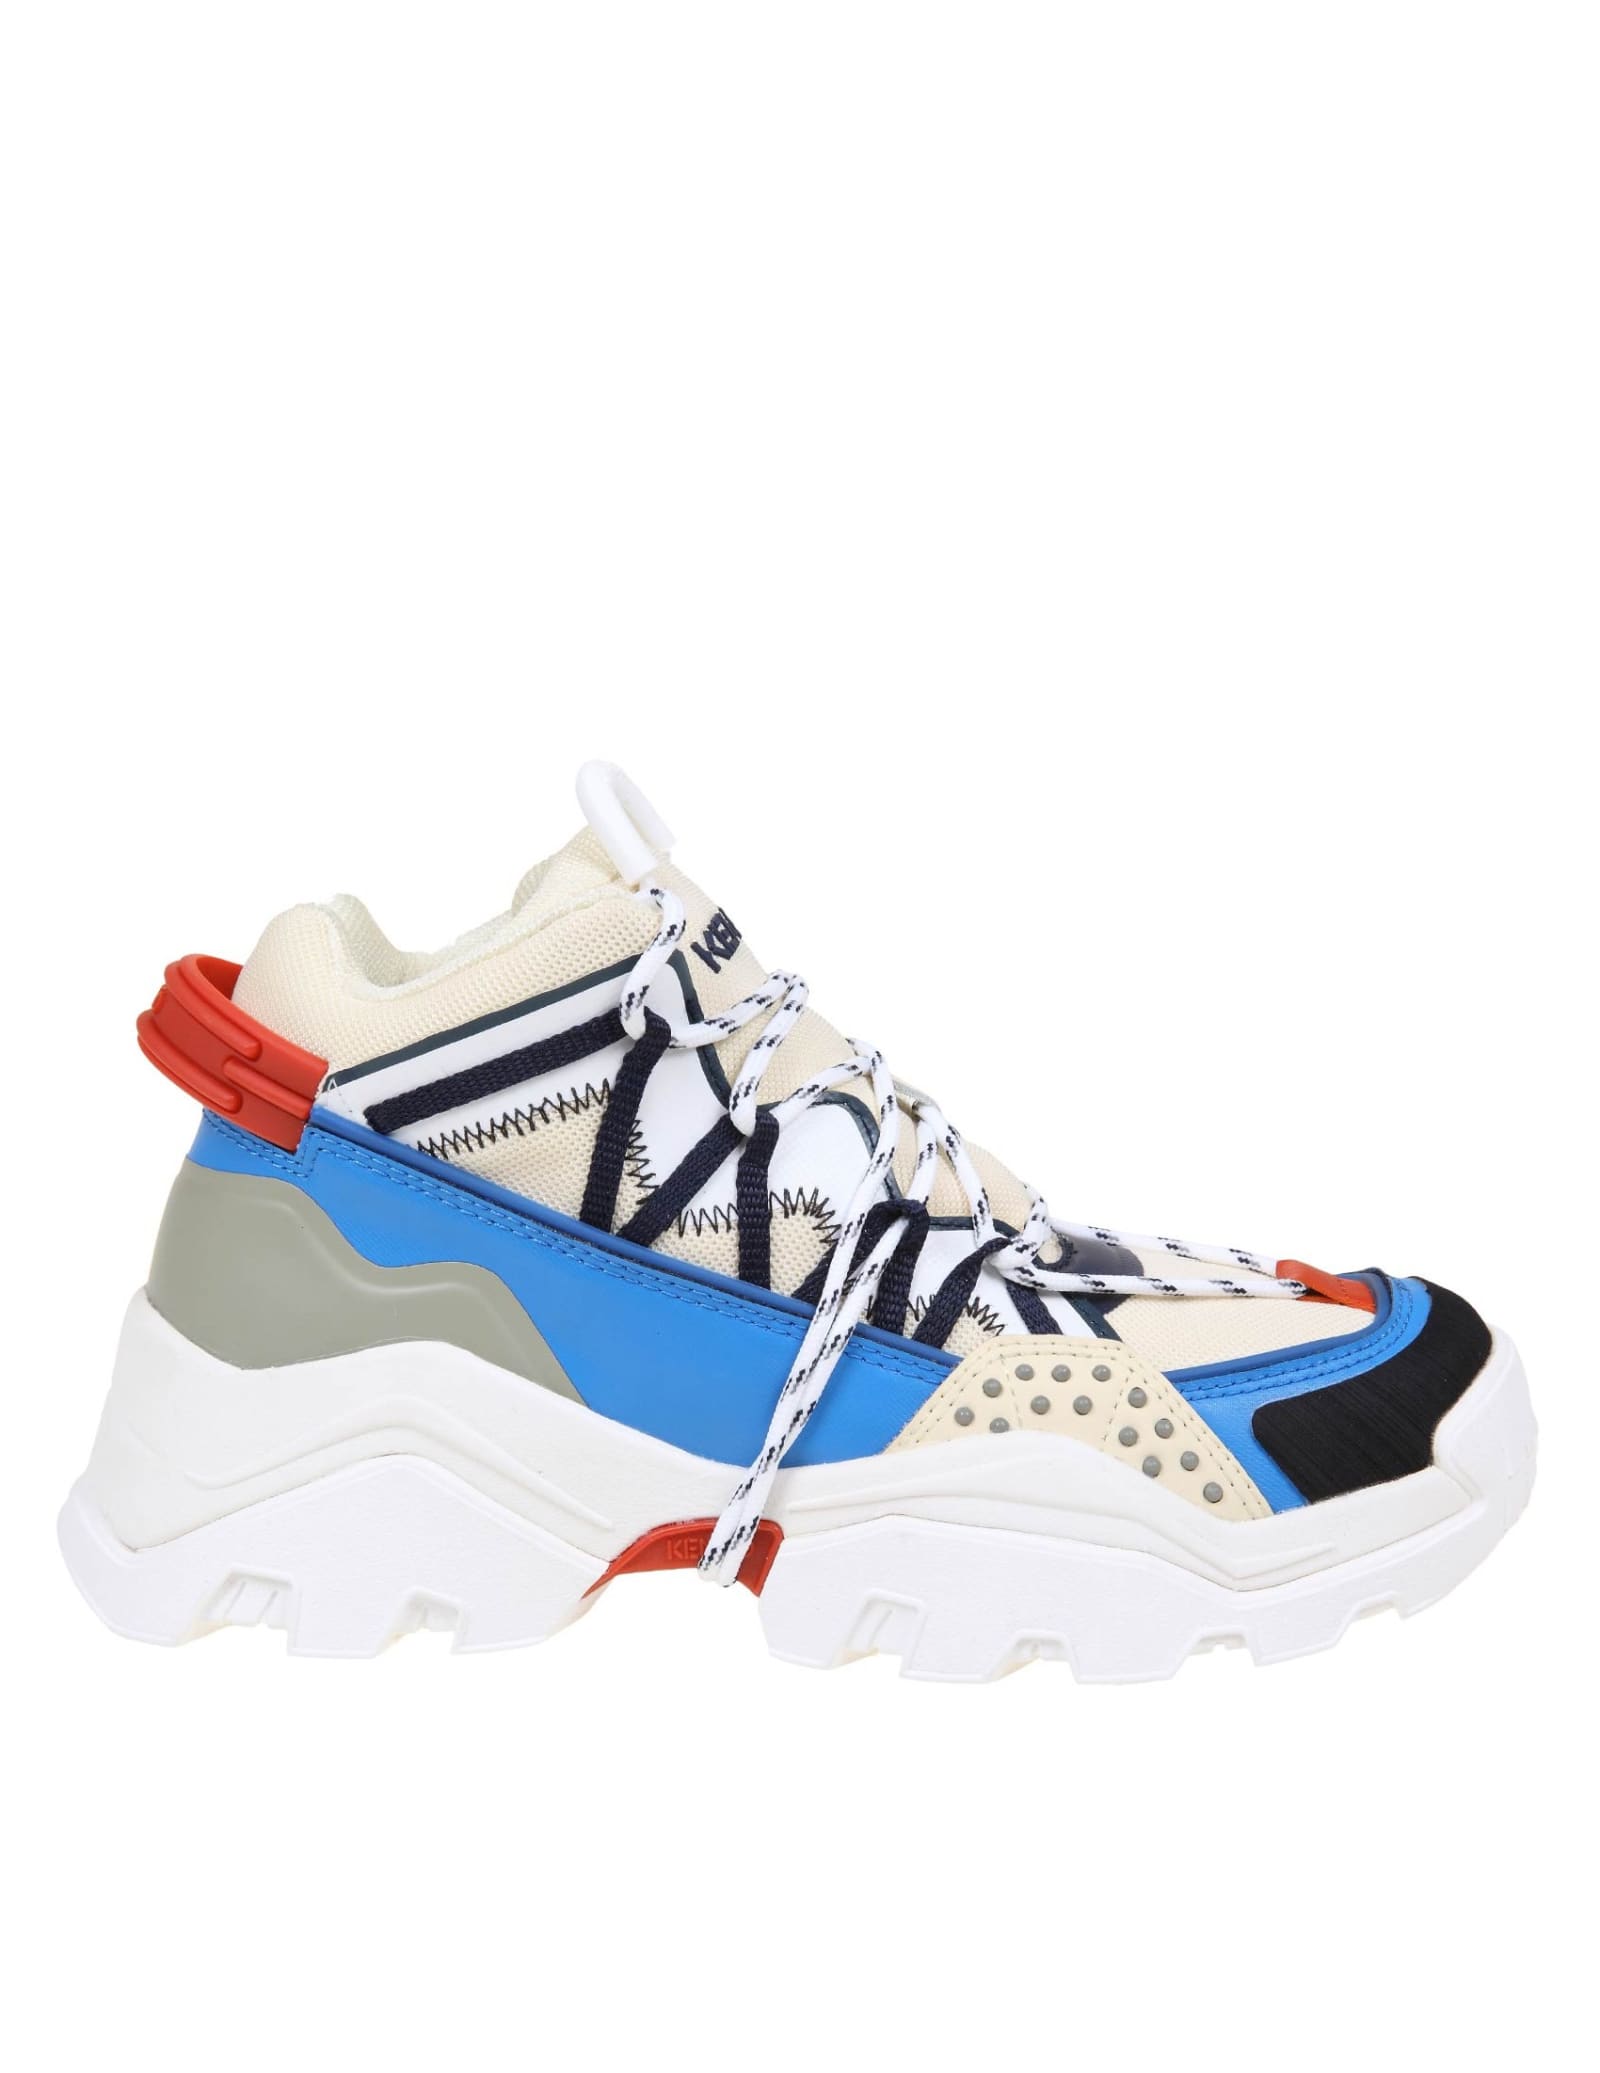 Kenzo Inka Sneakers In Leather And Multicolor Fabric